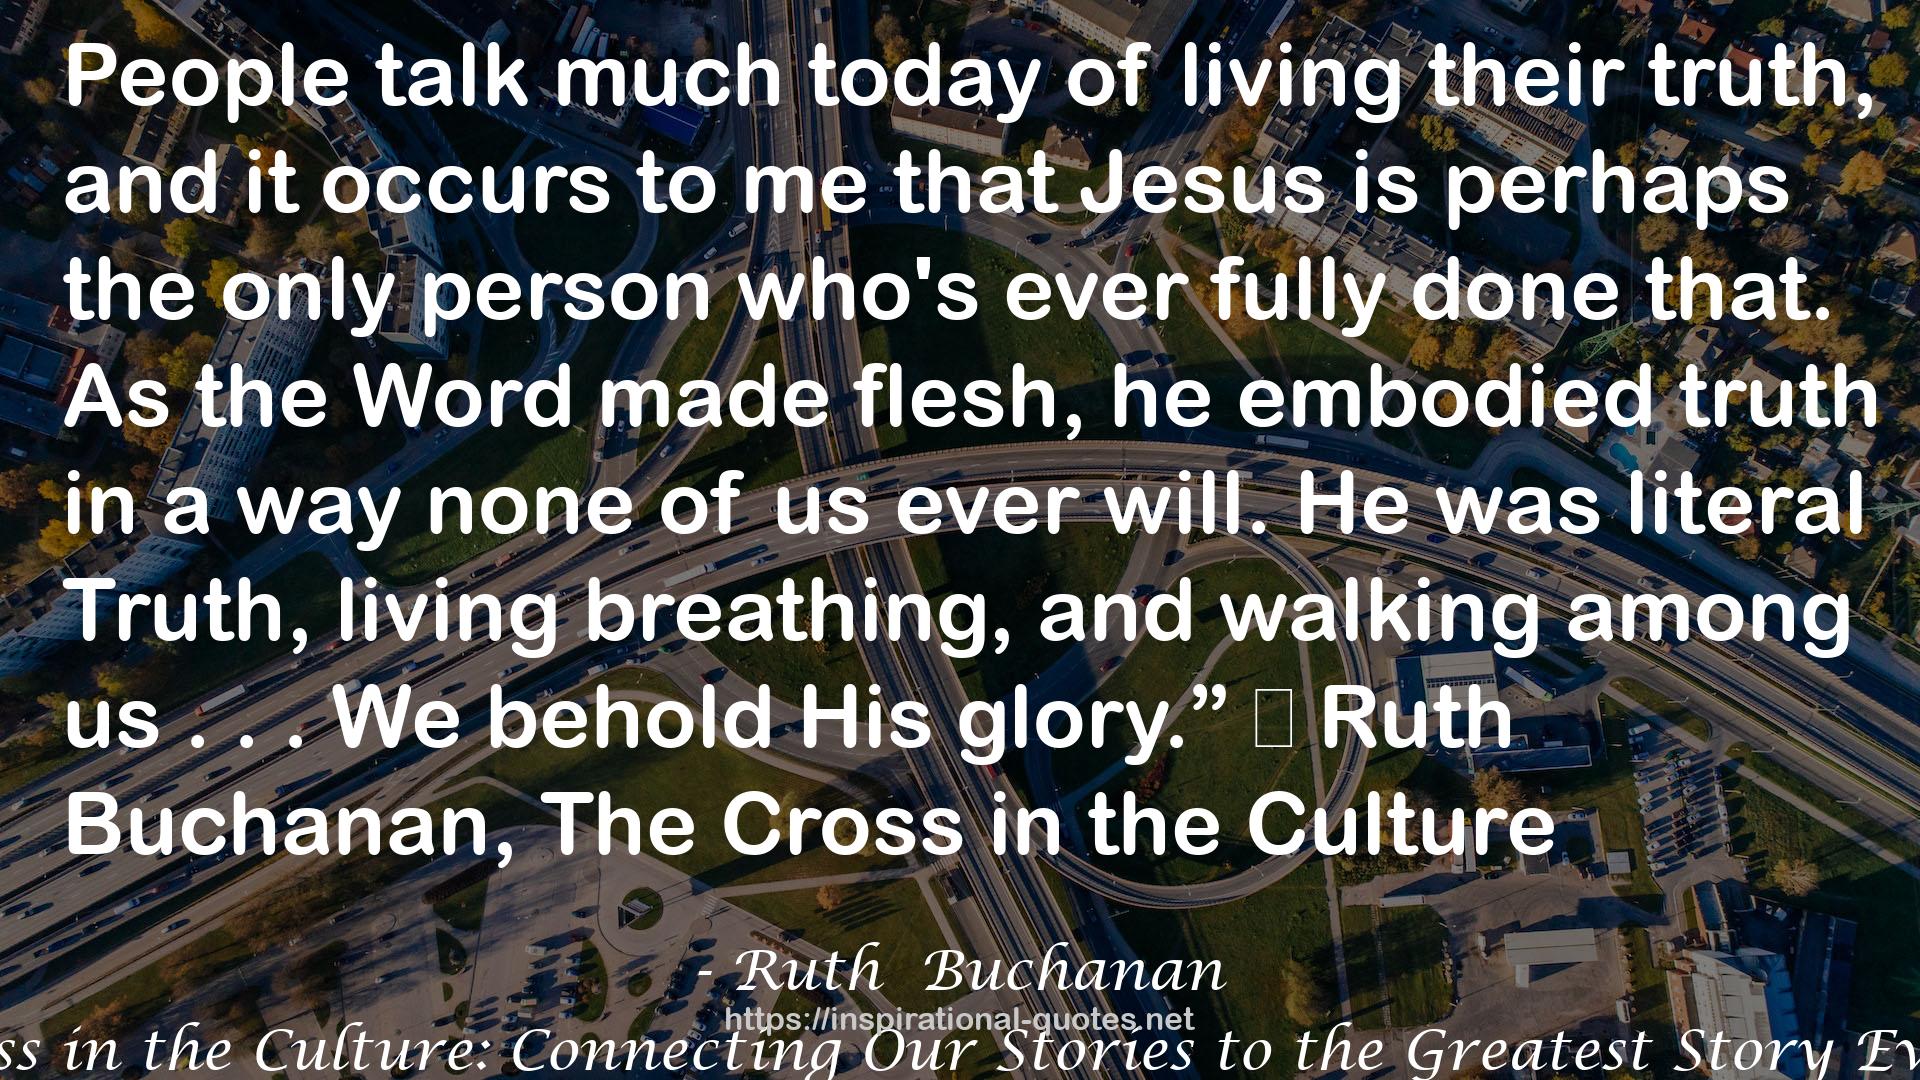 The Cross in the Culture: Connecting Our Stories to the Greatest Story Ever Told QUOTES